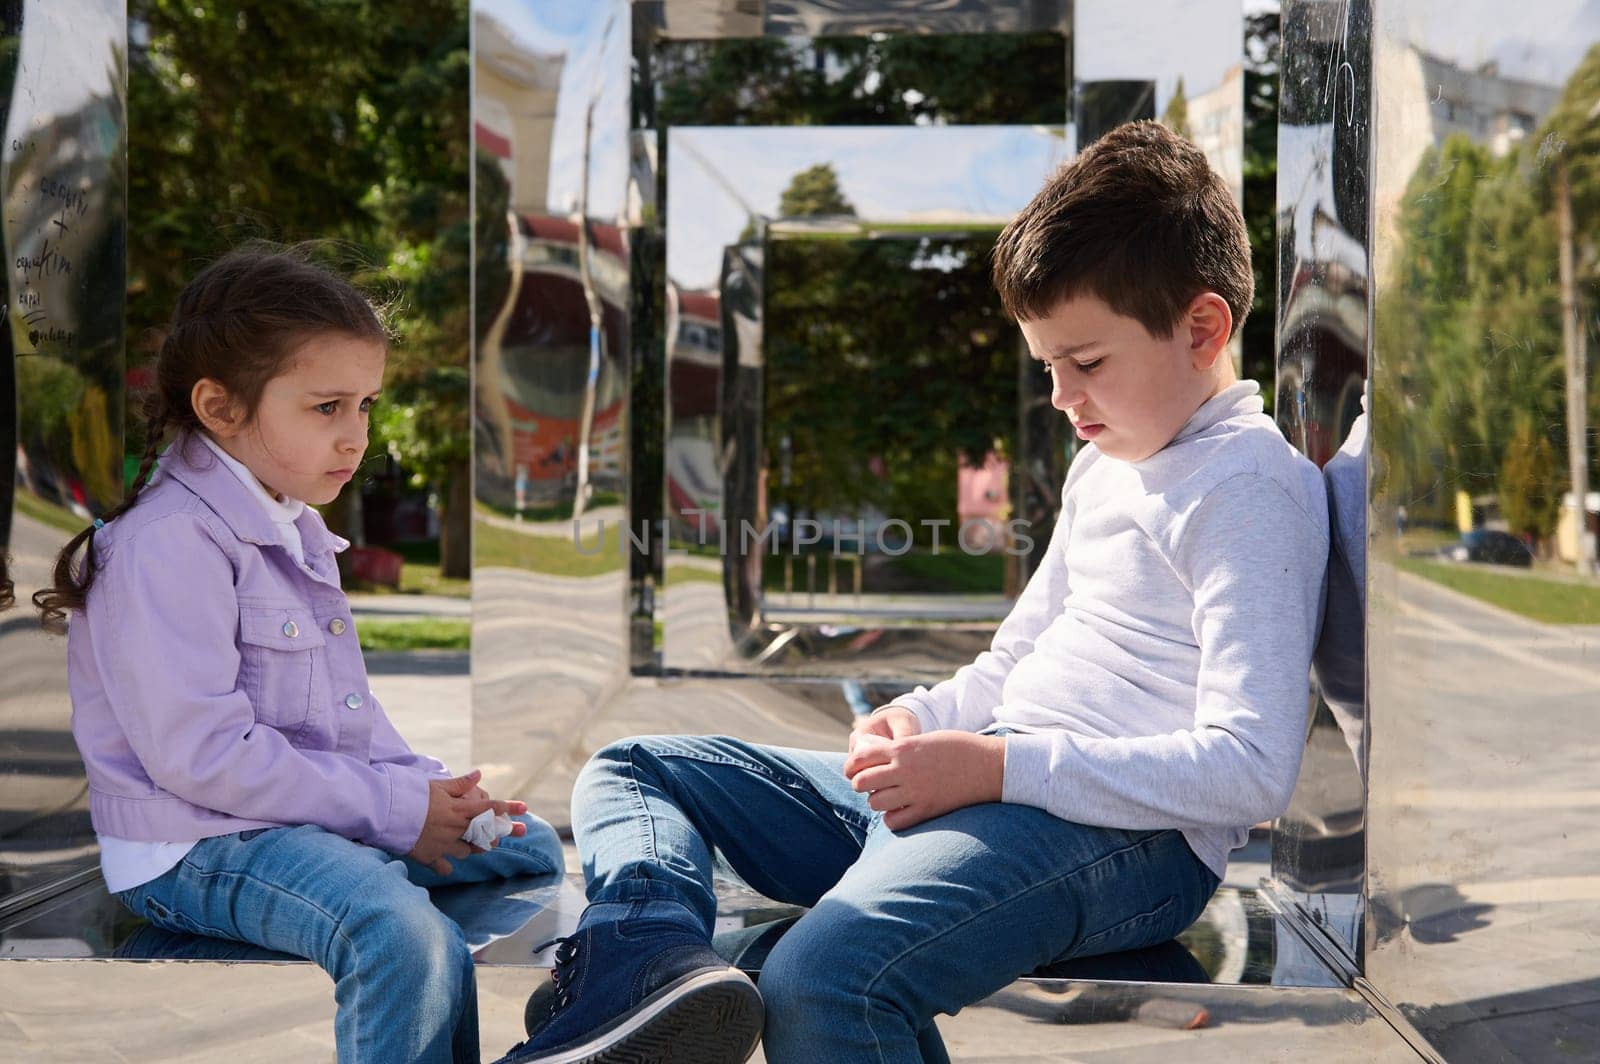 Portrait of two adorable kids boy and girl, brother and sister sitting on mirror bench in urban park, looking sad during family outing. Friendships and human relationships. People. Lifestyle. Leisures